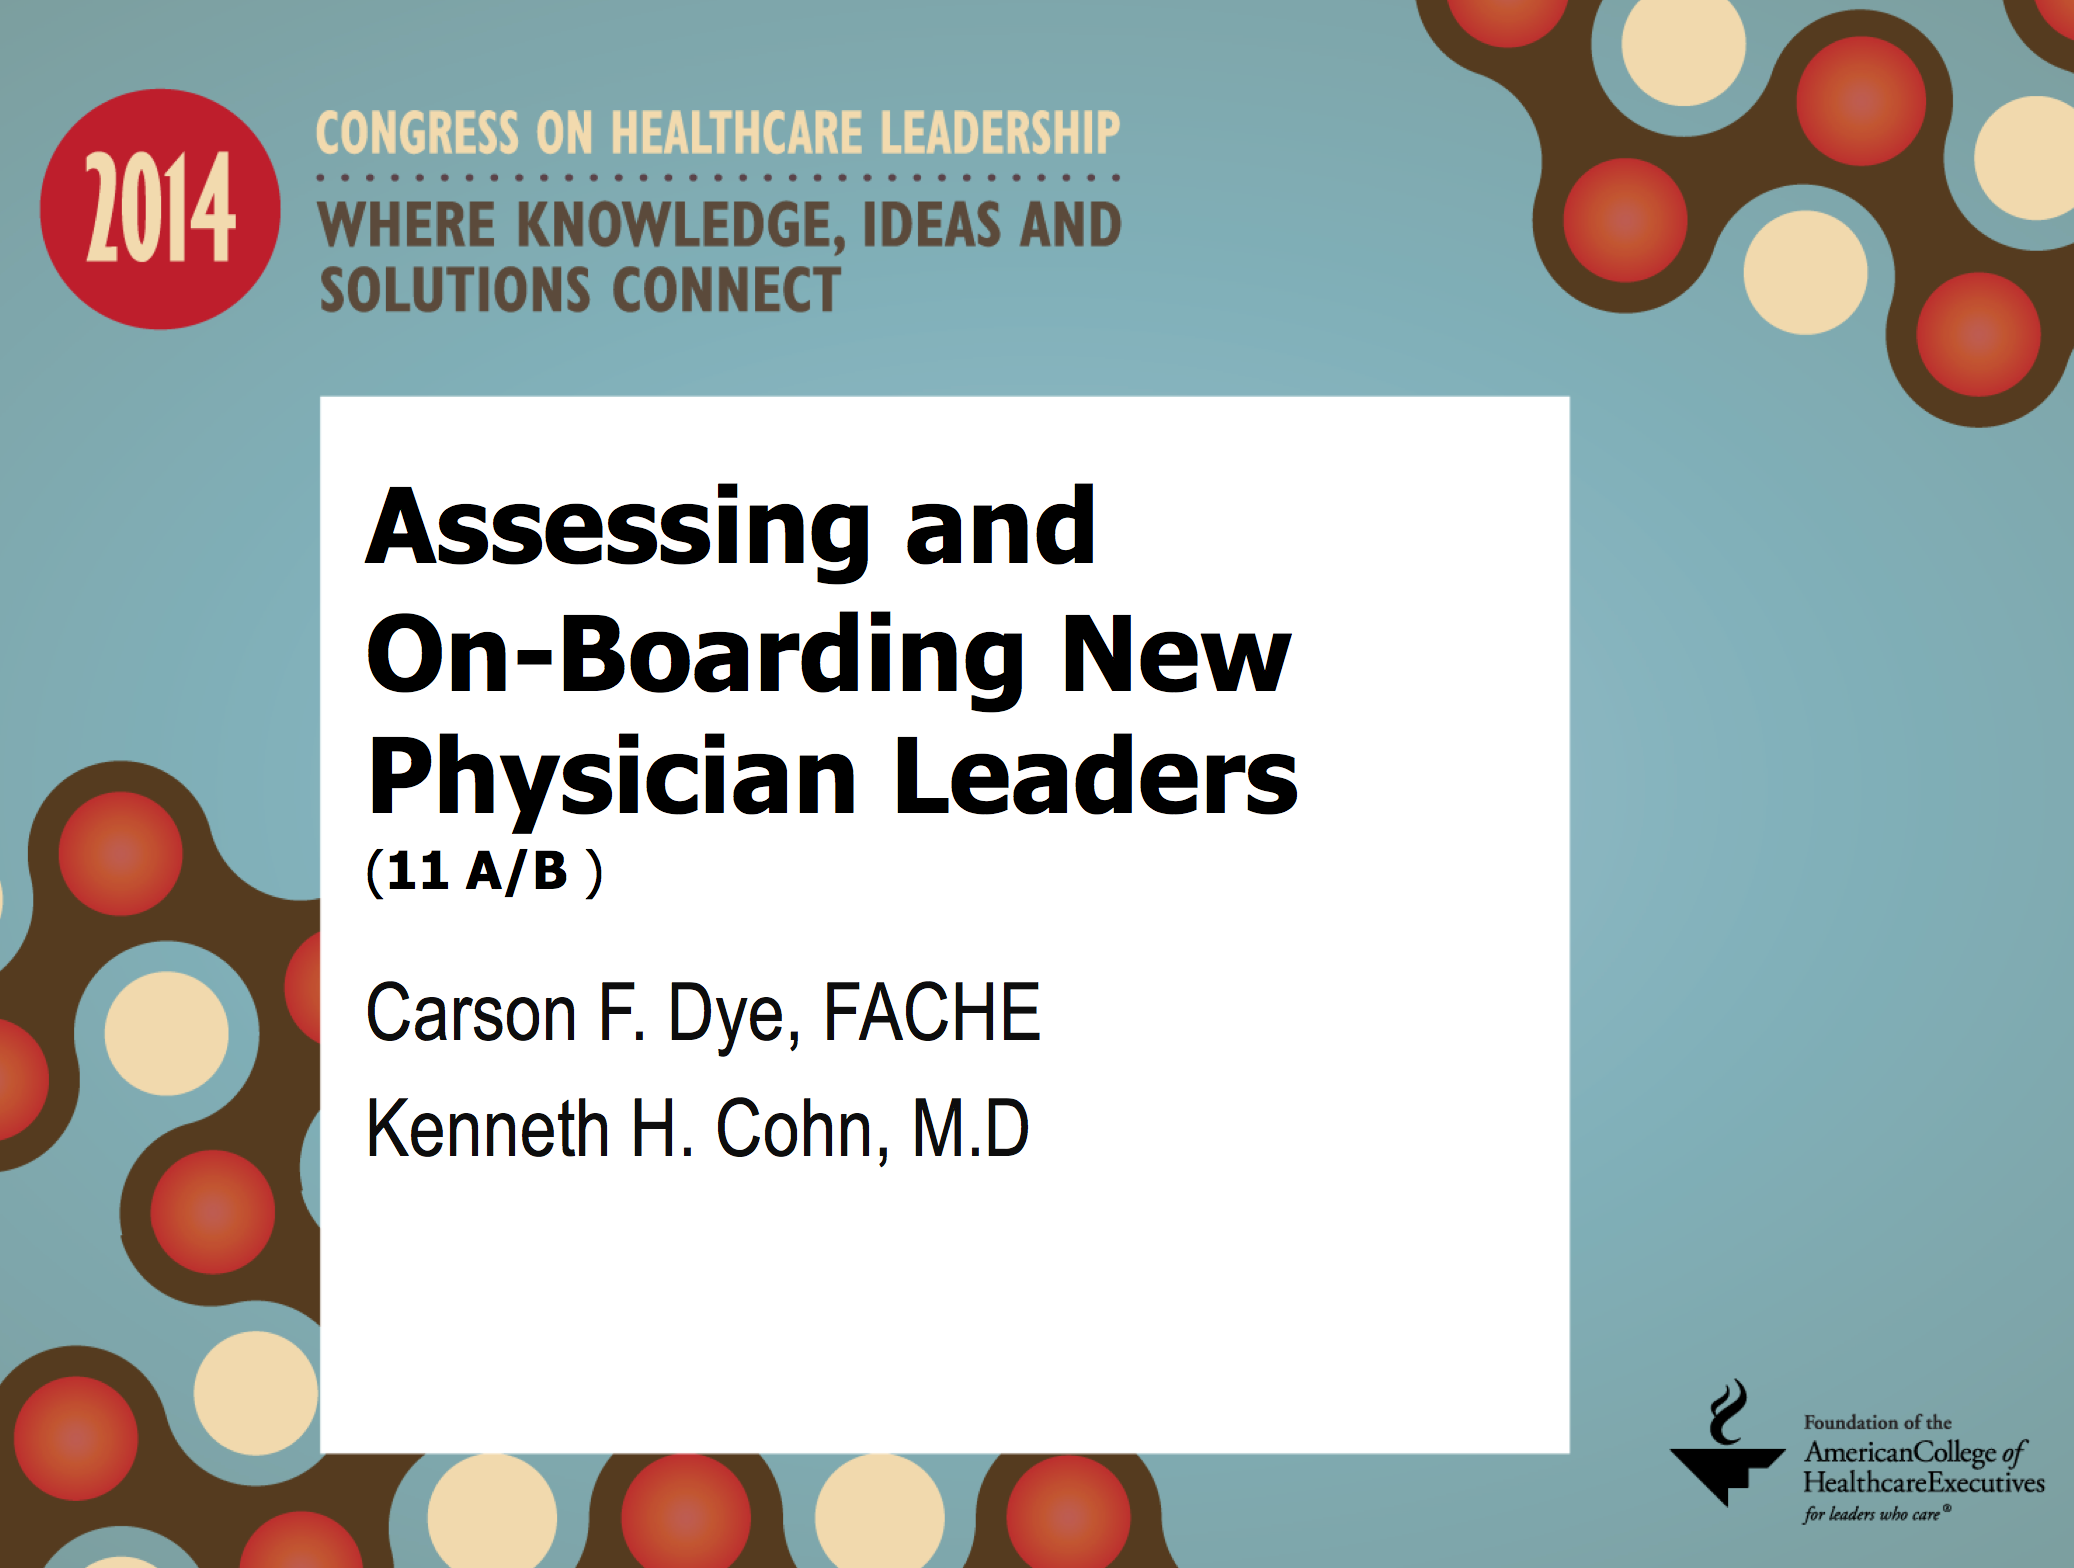 ACHE Congress 2014 - Assessing and On-Boarding New Physician Leaders